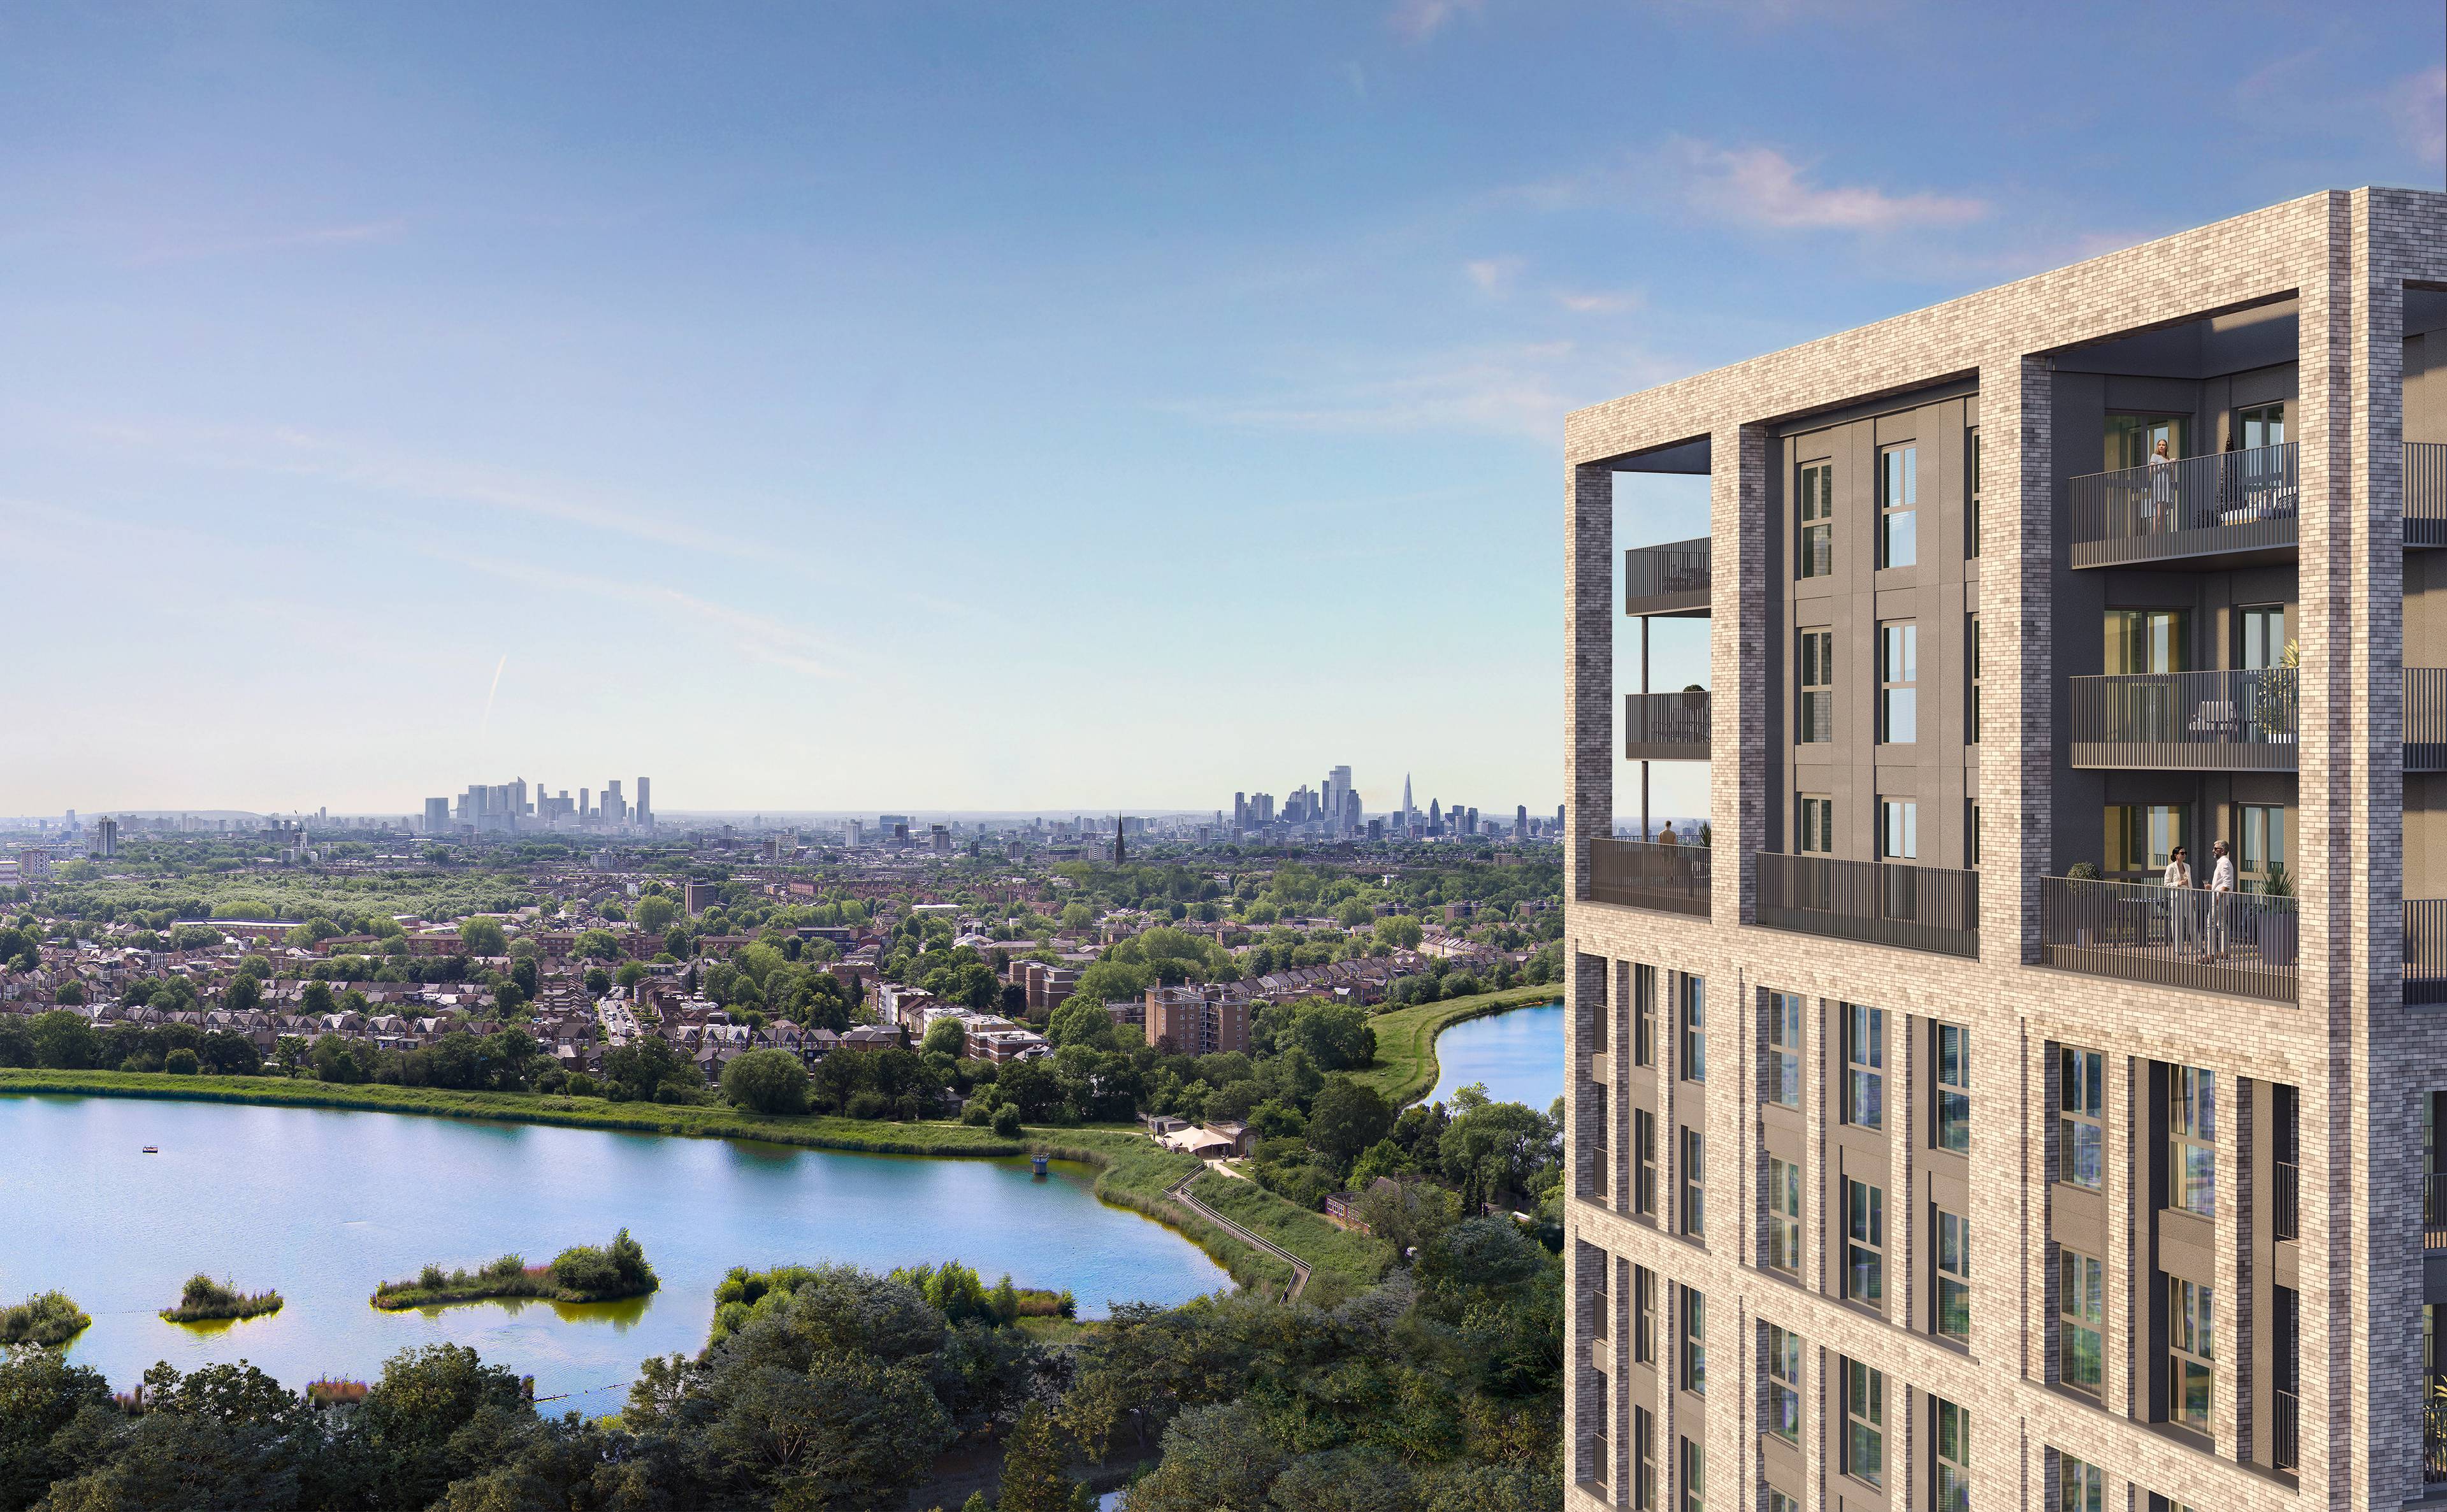 Hidden Oasis, 10 minutes from Central London -  Luxury 2-Bedroom Apartment in a Stunning New Development Surrounded by Nature - Thirteenth Floor - Alexandra Palace Views